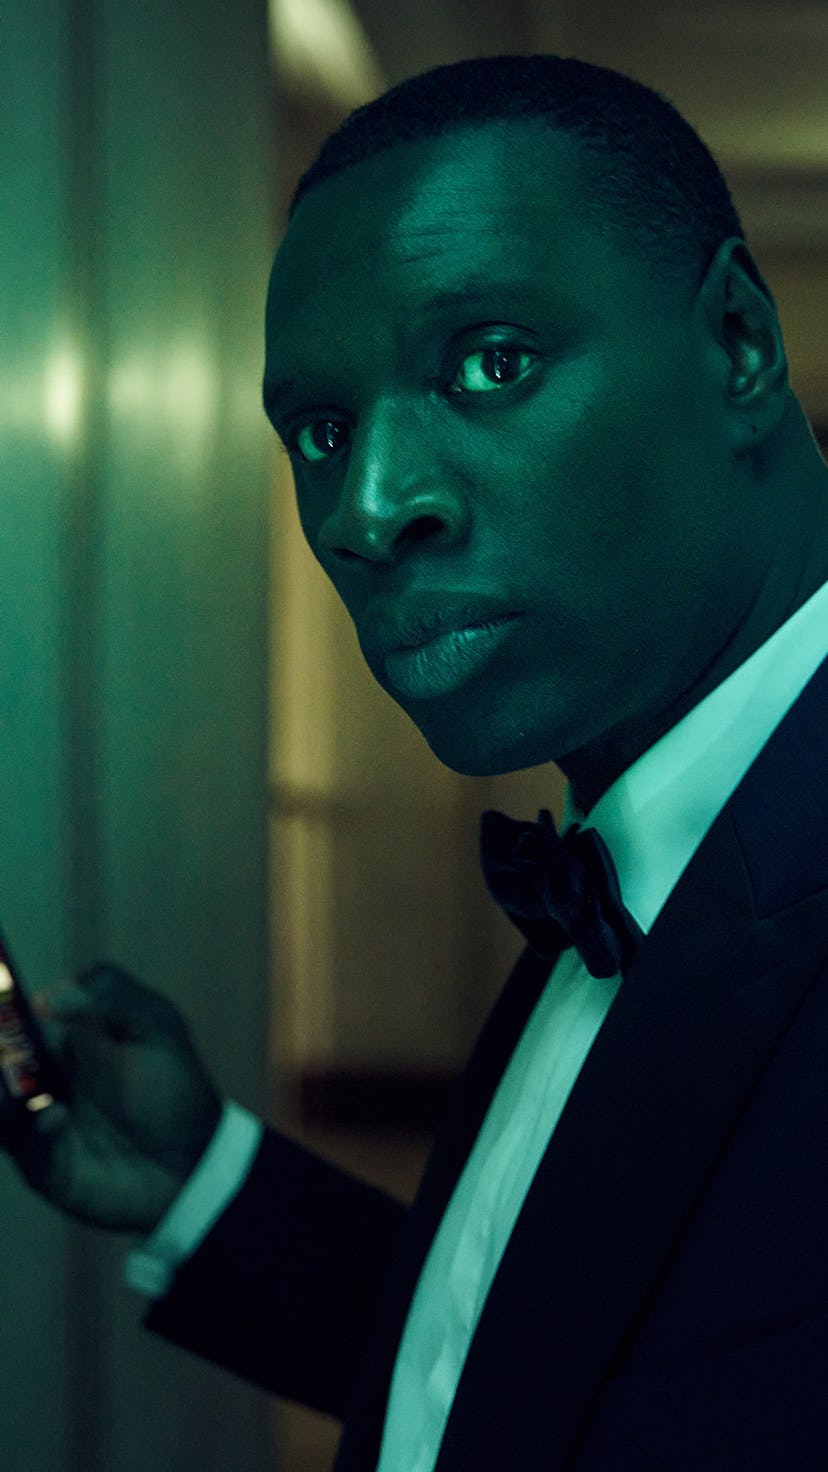 Omar Sy stars in 'Lupin,' which debuts its second season on Netflix this week.